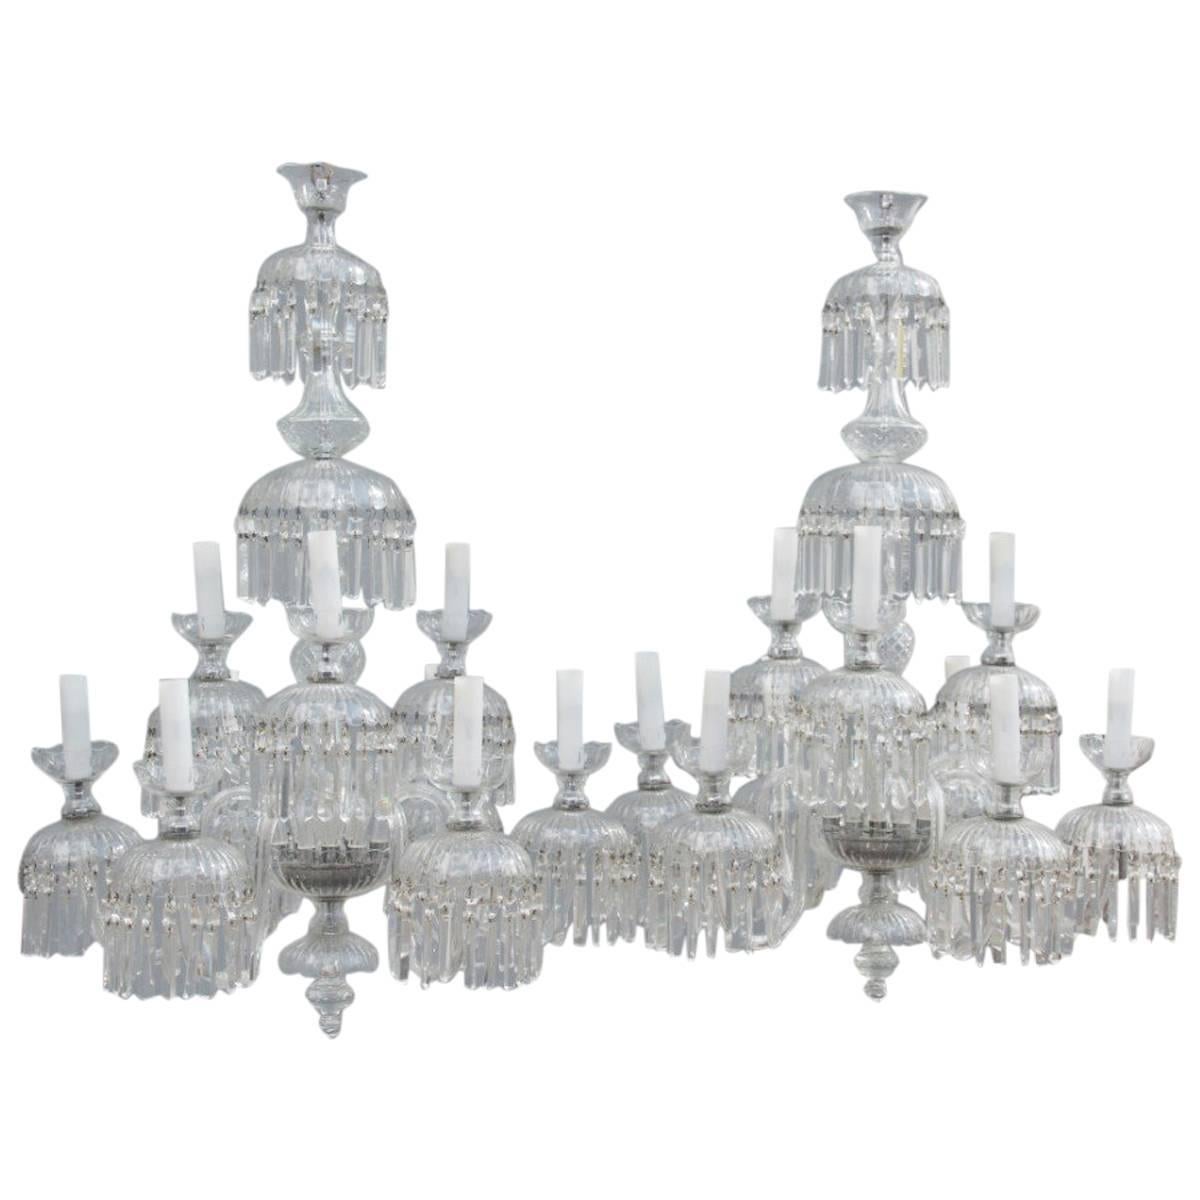 Bohemian Pair of Chandelier 1950s Very Chic and Elegant Design 9 Lights.